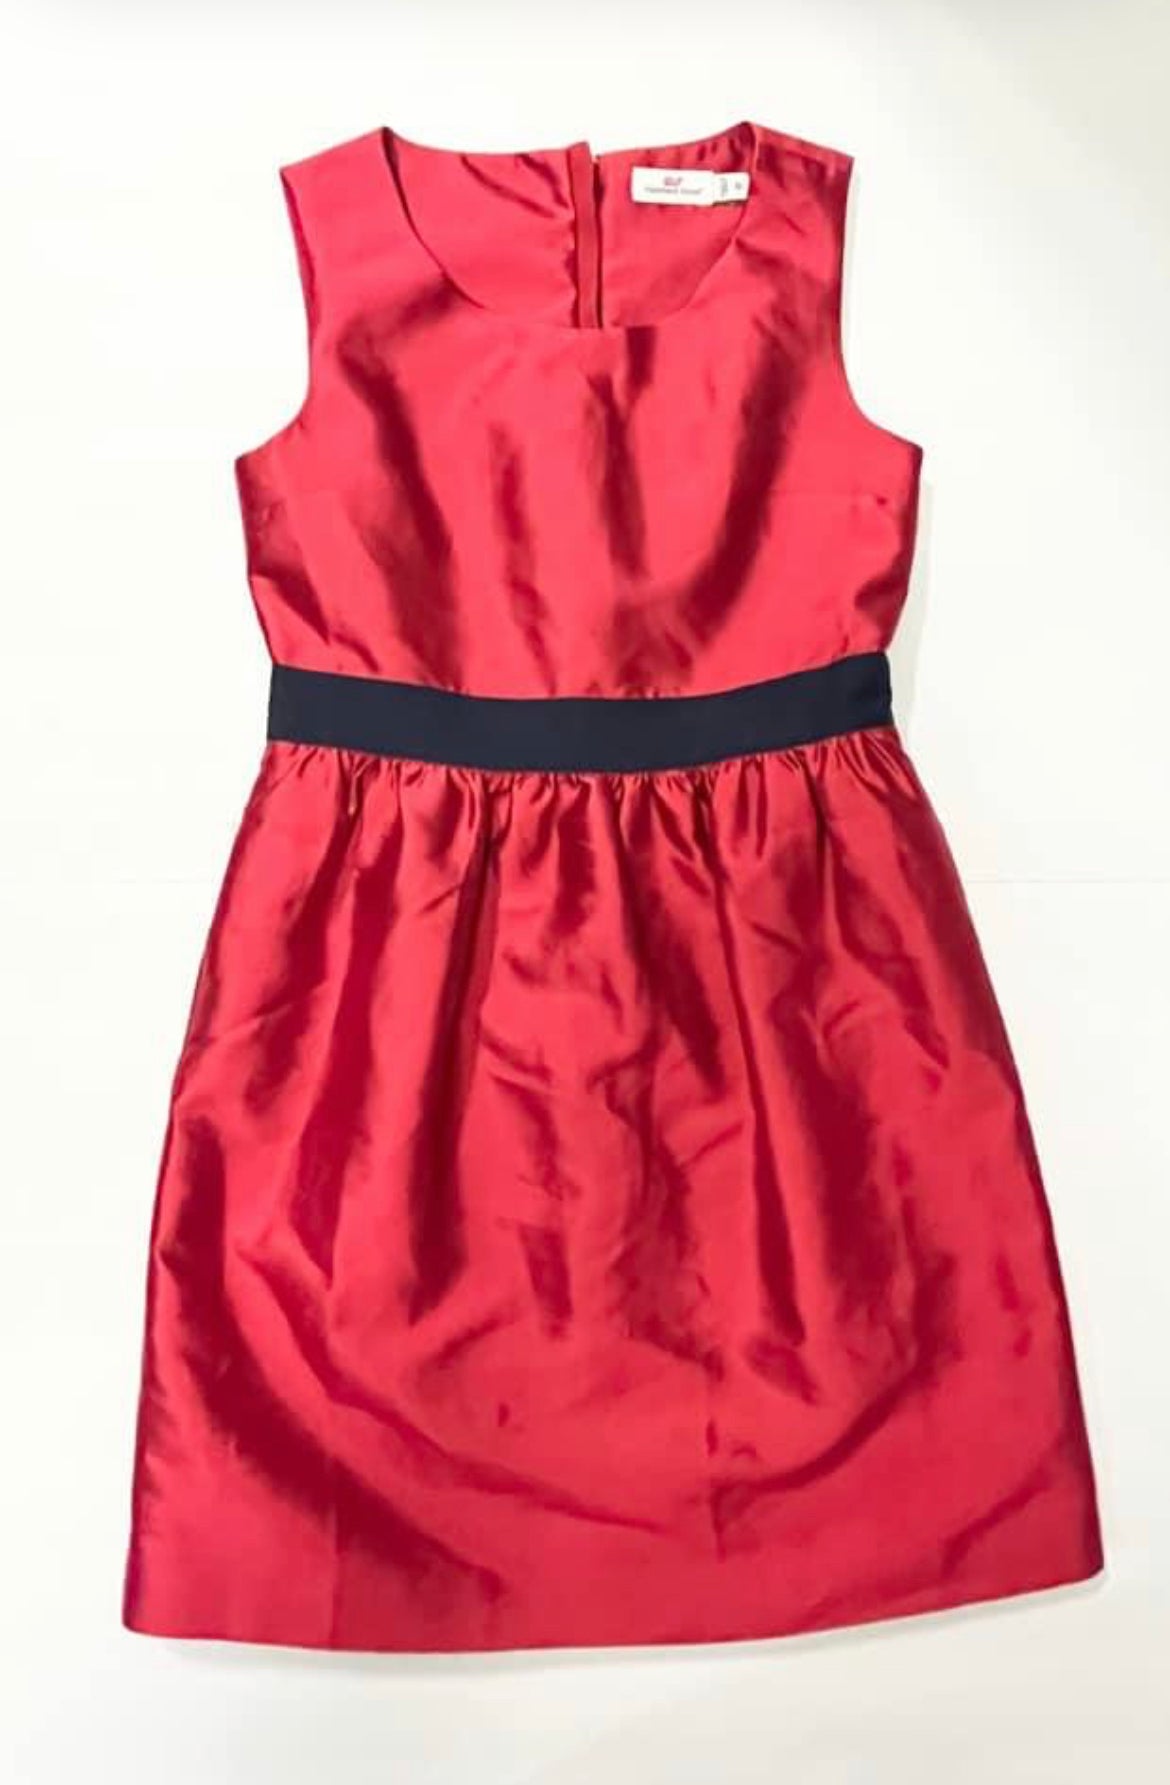 Size 10 Vineyard Vines Red Party Dress